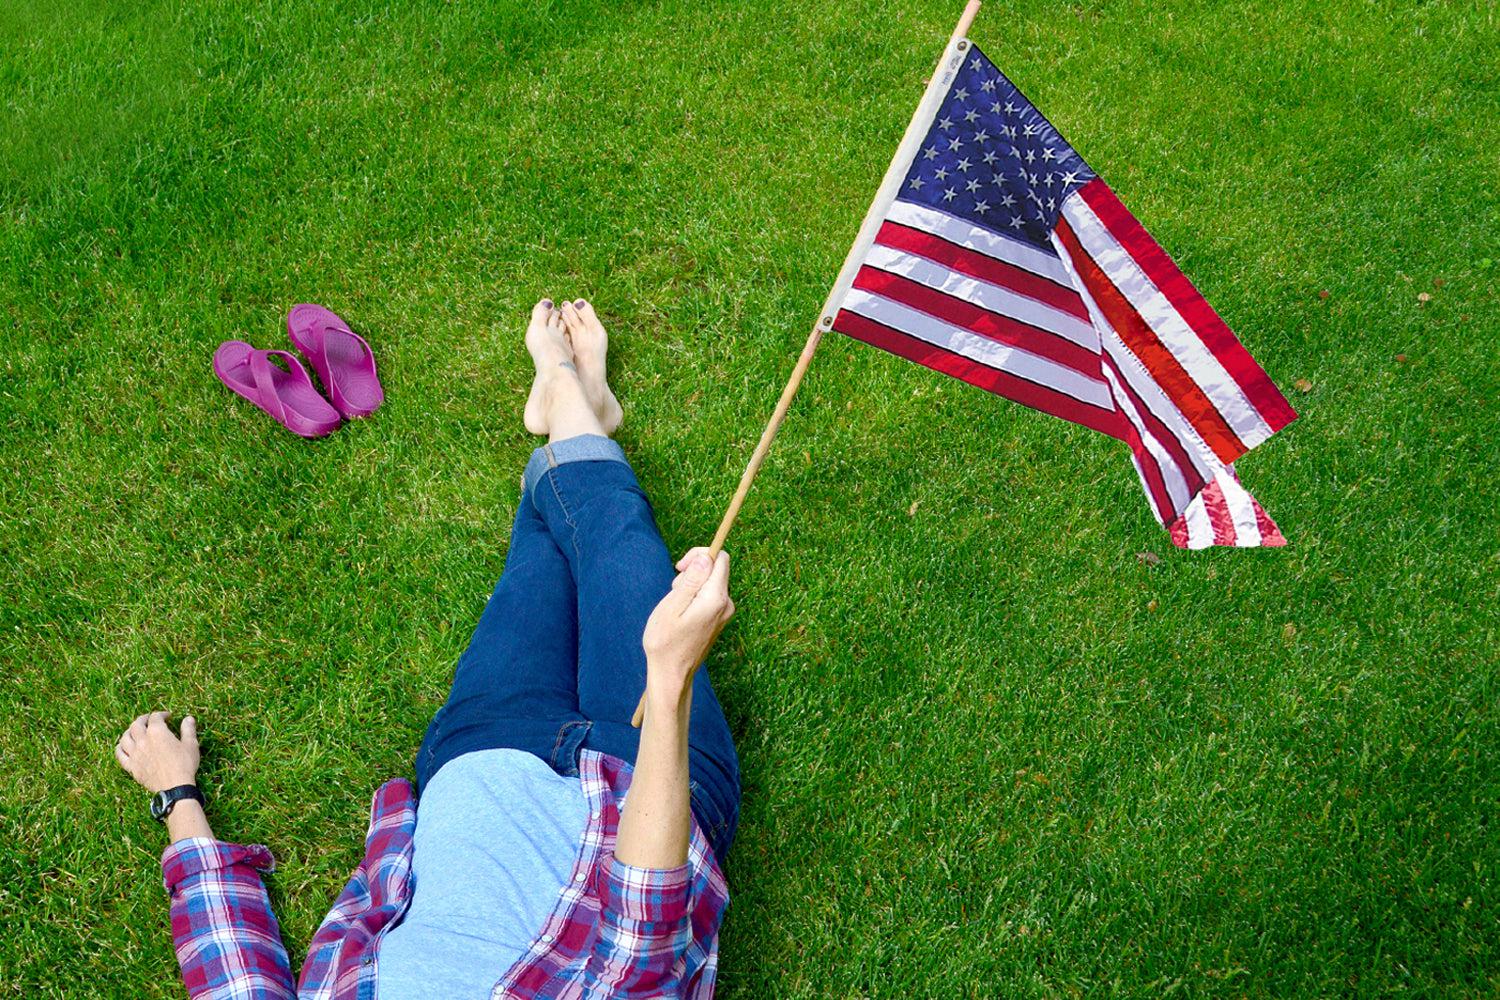 NuuSol-Girl laying in grass with a pair of Rustic Wine flip flops lying next to her. She's holding an American flag.